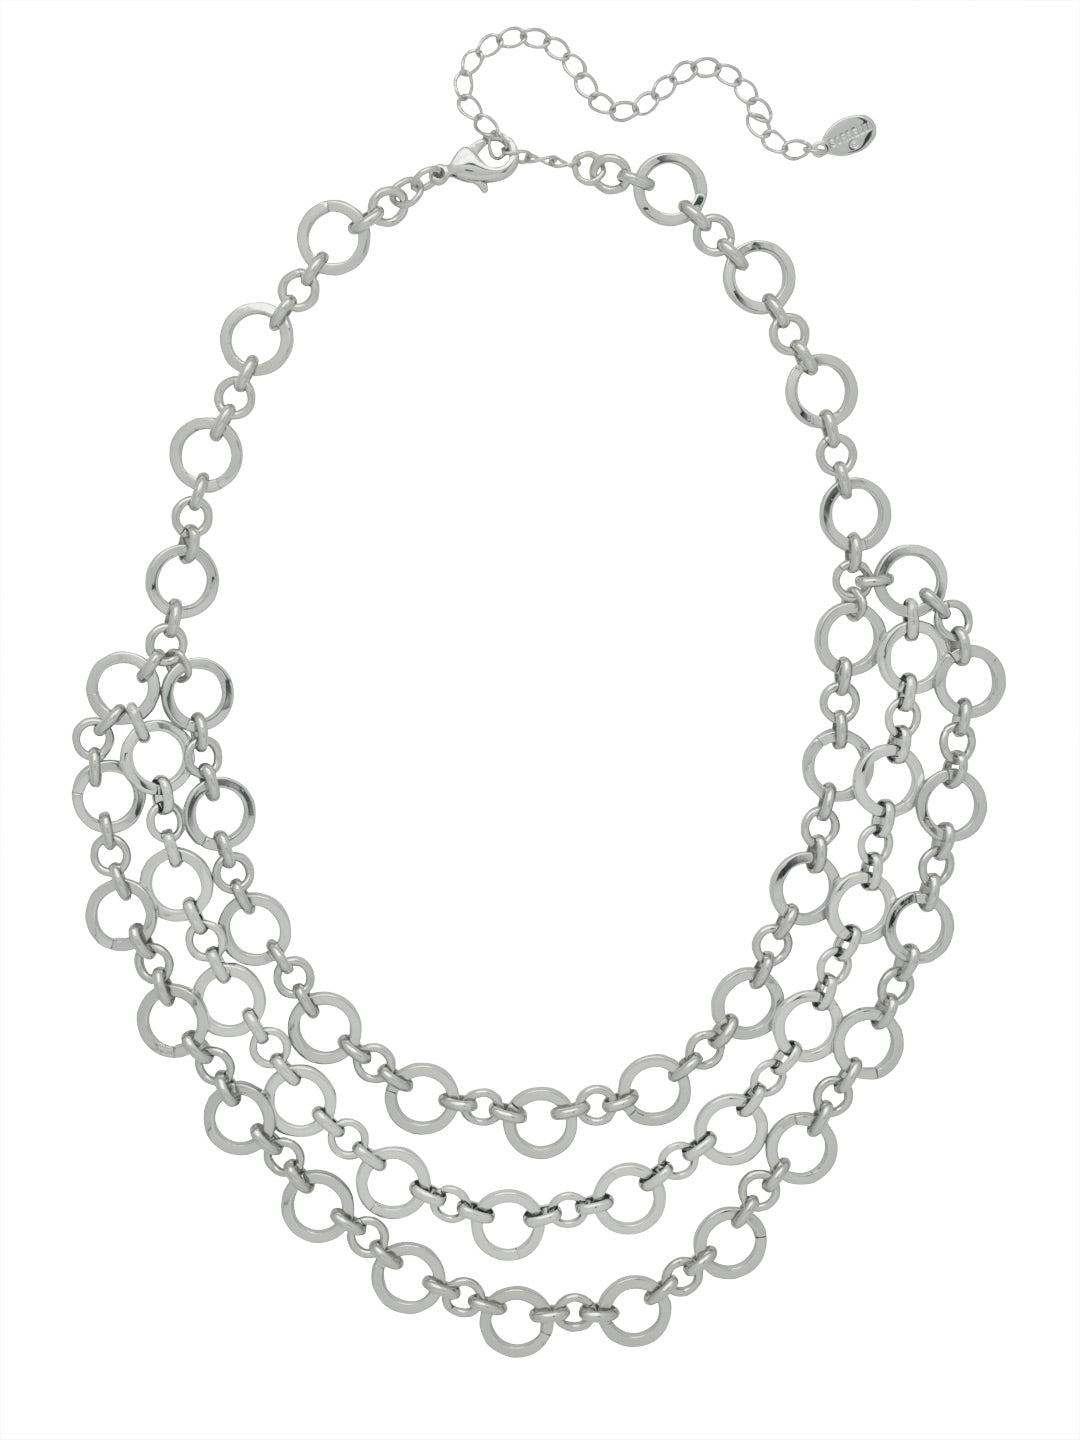 Rhodri Layered Necklace - 4NFF15PDMTL - <p>The Rhodri Layered Necklace features three bold layers of round link chains as a single, adjustable necklace secured by a lobster claw clasp. From Sorrelli's Bare Metallic collection in our Palladium finish.</p>